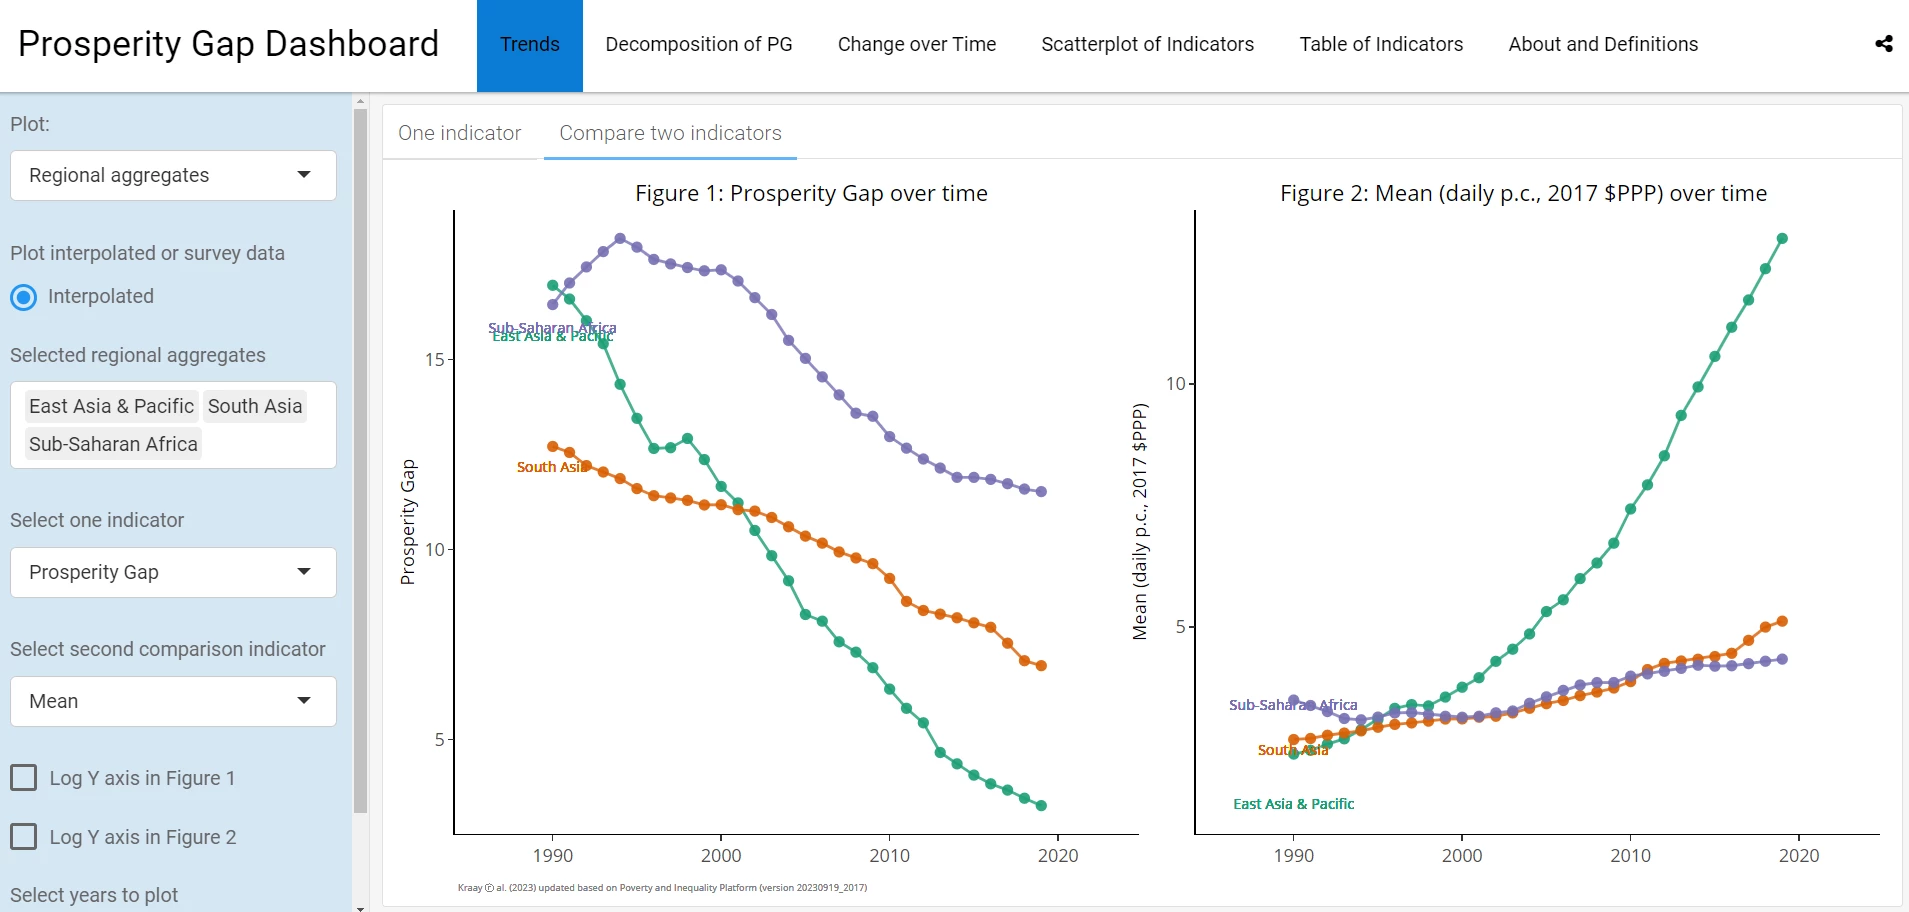 Trends in the Prosperity Gap for East Asia, South Asia, and Sub-Saharan Africa (left panel) and the mean (right panel) from 1990 to 2019.